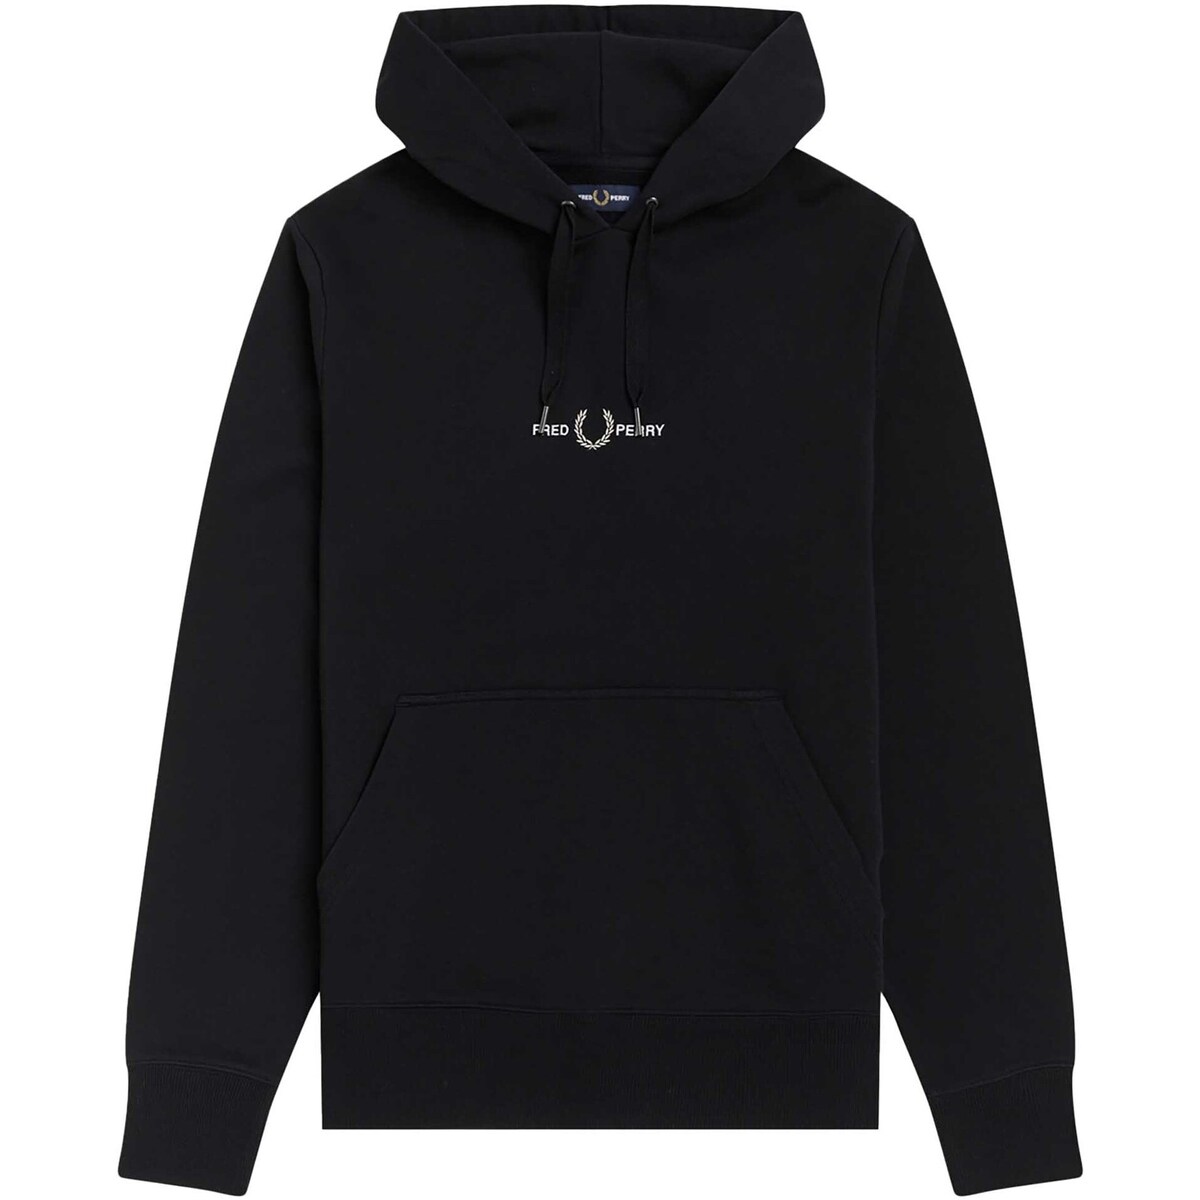 Abbigliamento Uomo Felpe in pile Fred Perry Fp Embroidered Hooded Sweatshirt Nero